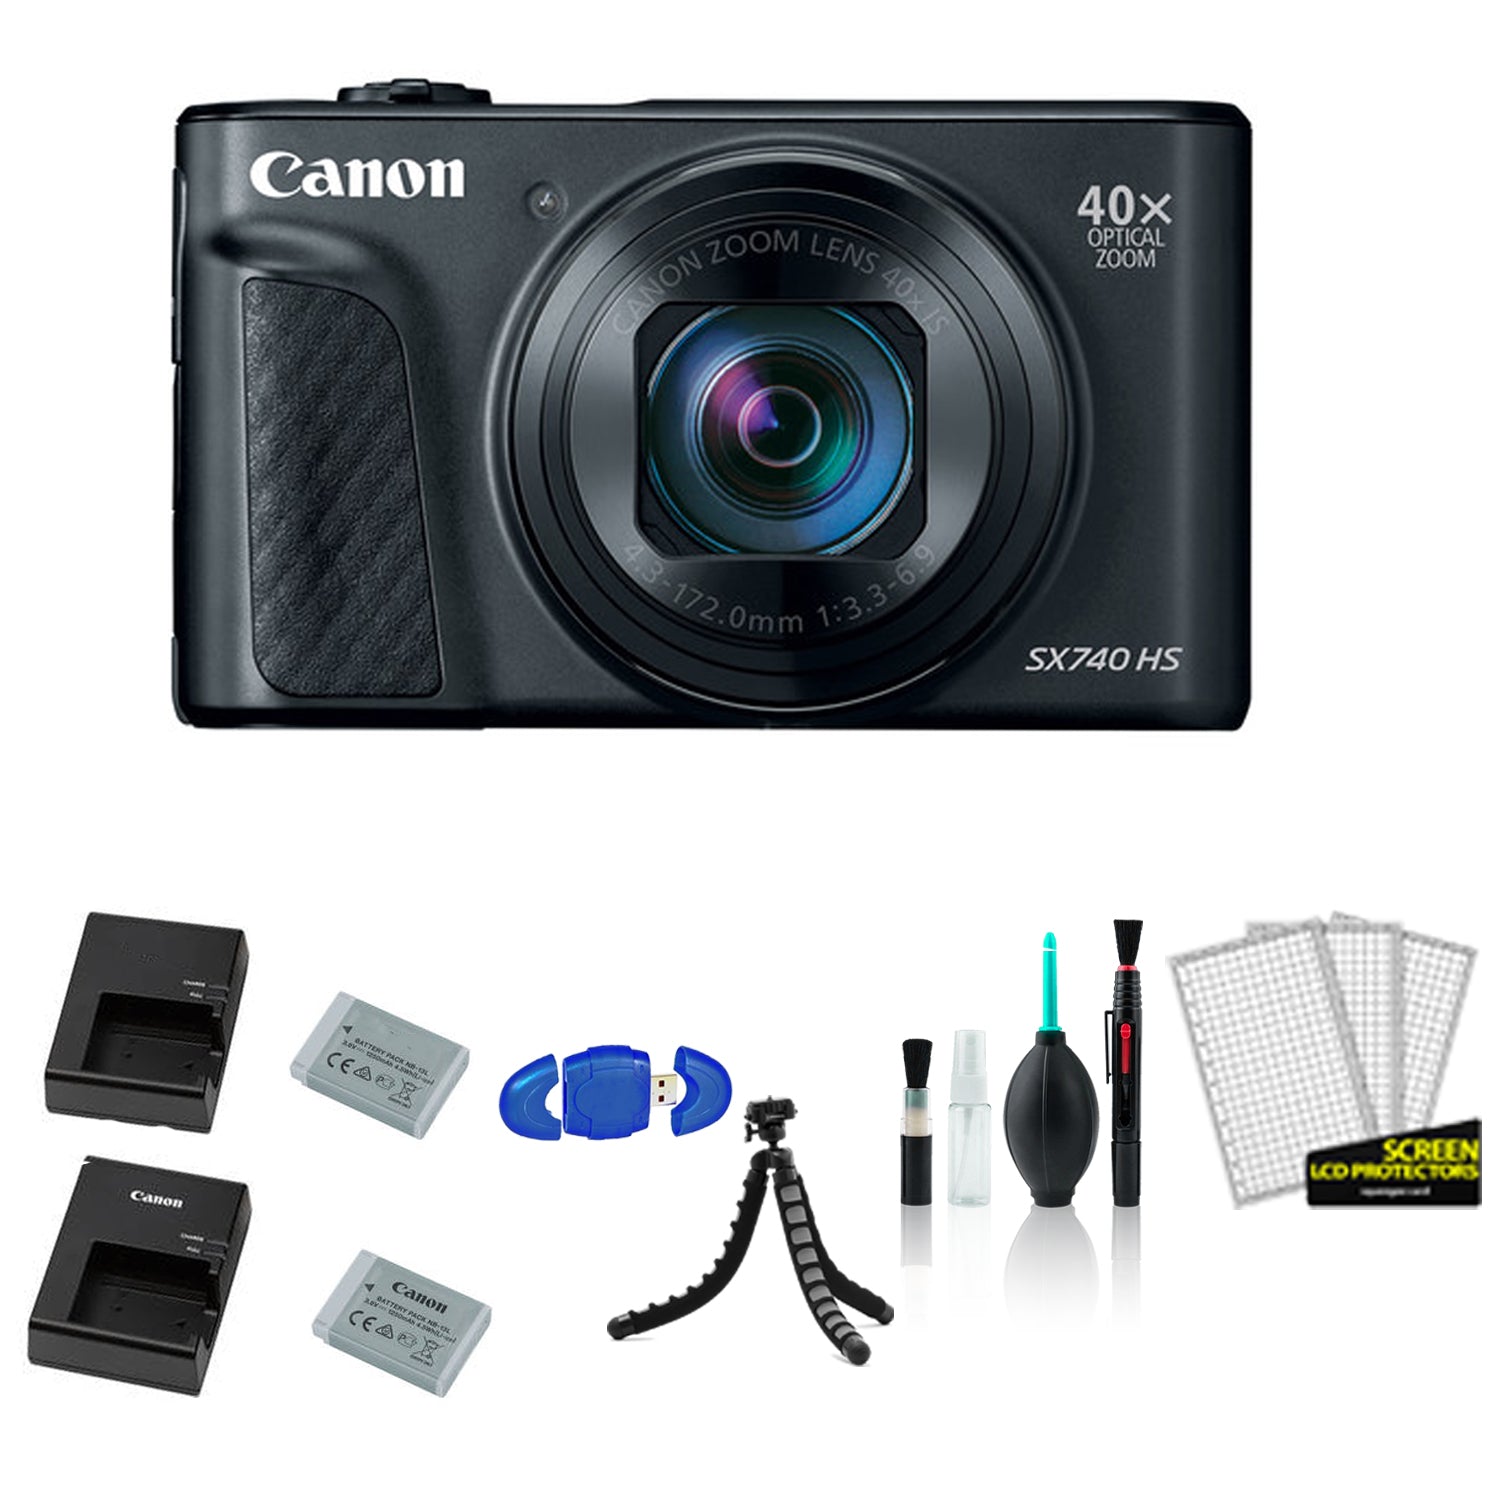 Canon PowerShot SX740 HS Digital Camera (Black) with Extra Battery and Charger + More - International Model